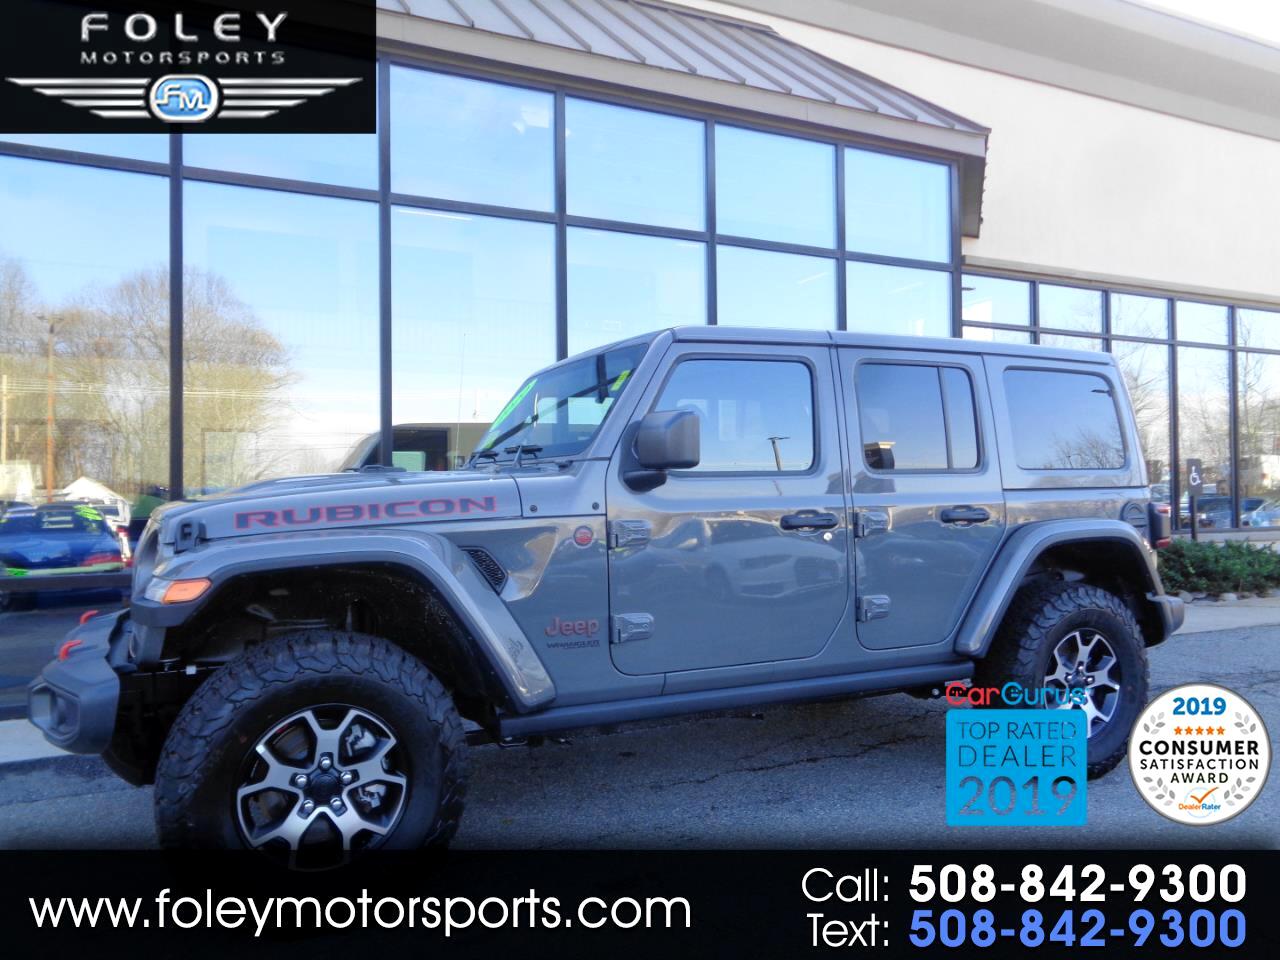 Used 2020 Jeep Wrangler Unlimited Sold in Shrewsbury MA 01545 Foley  Motorsports